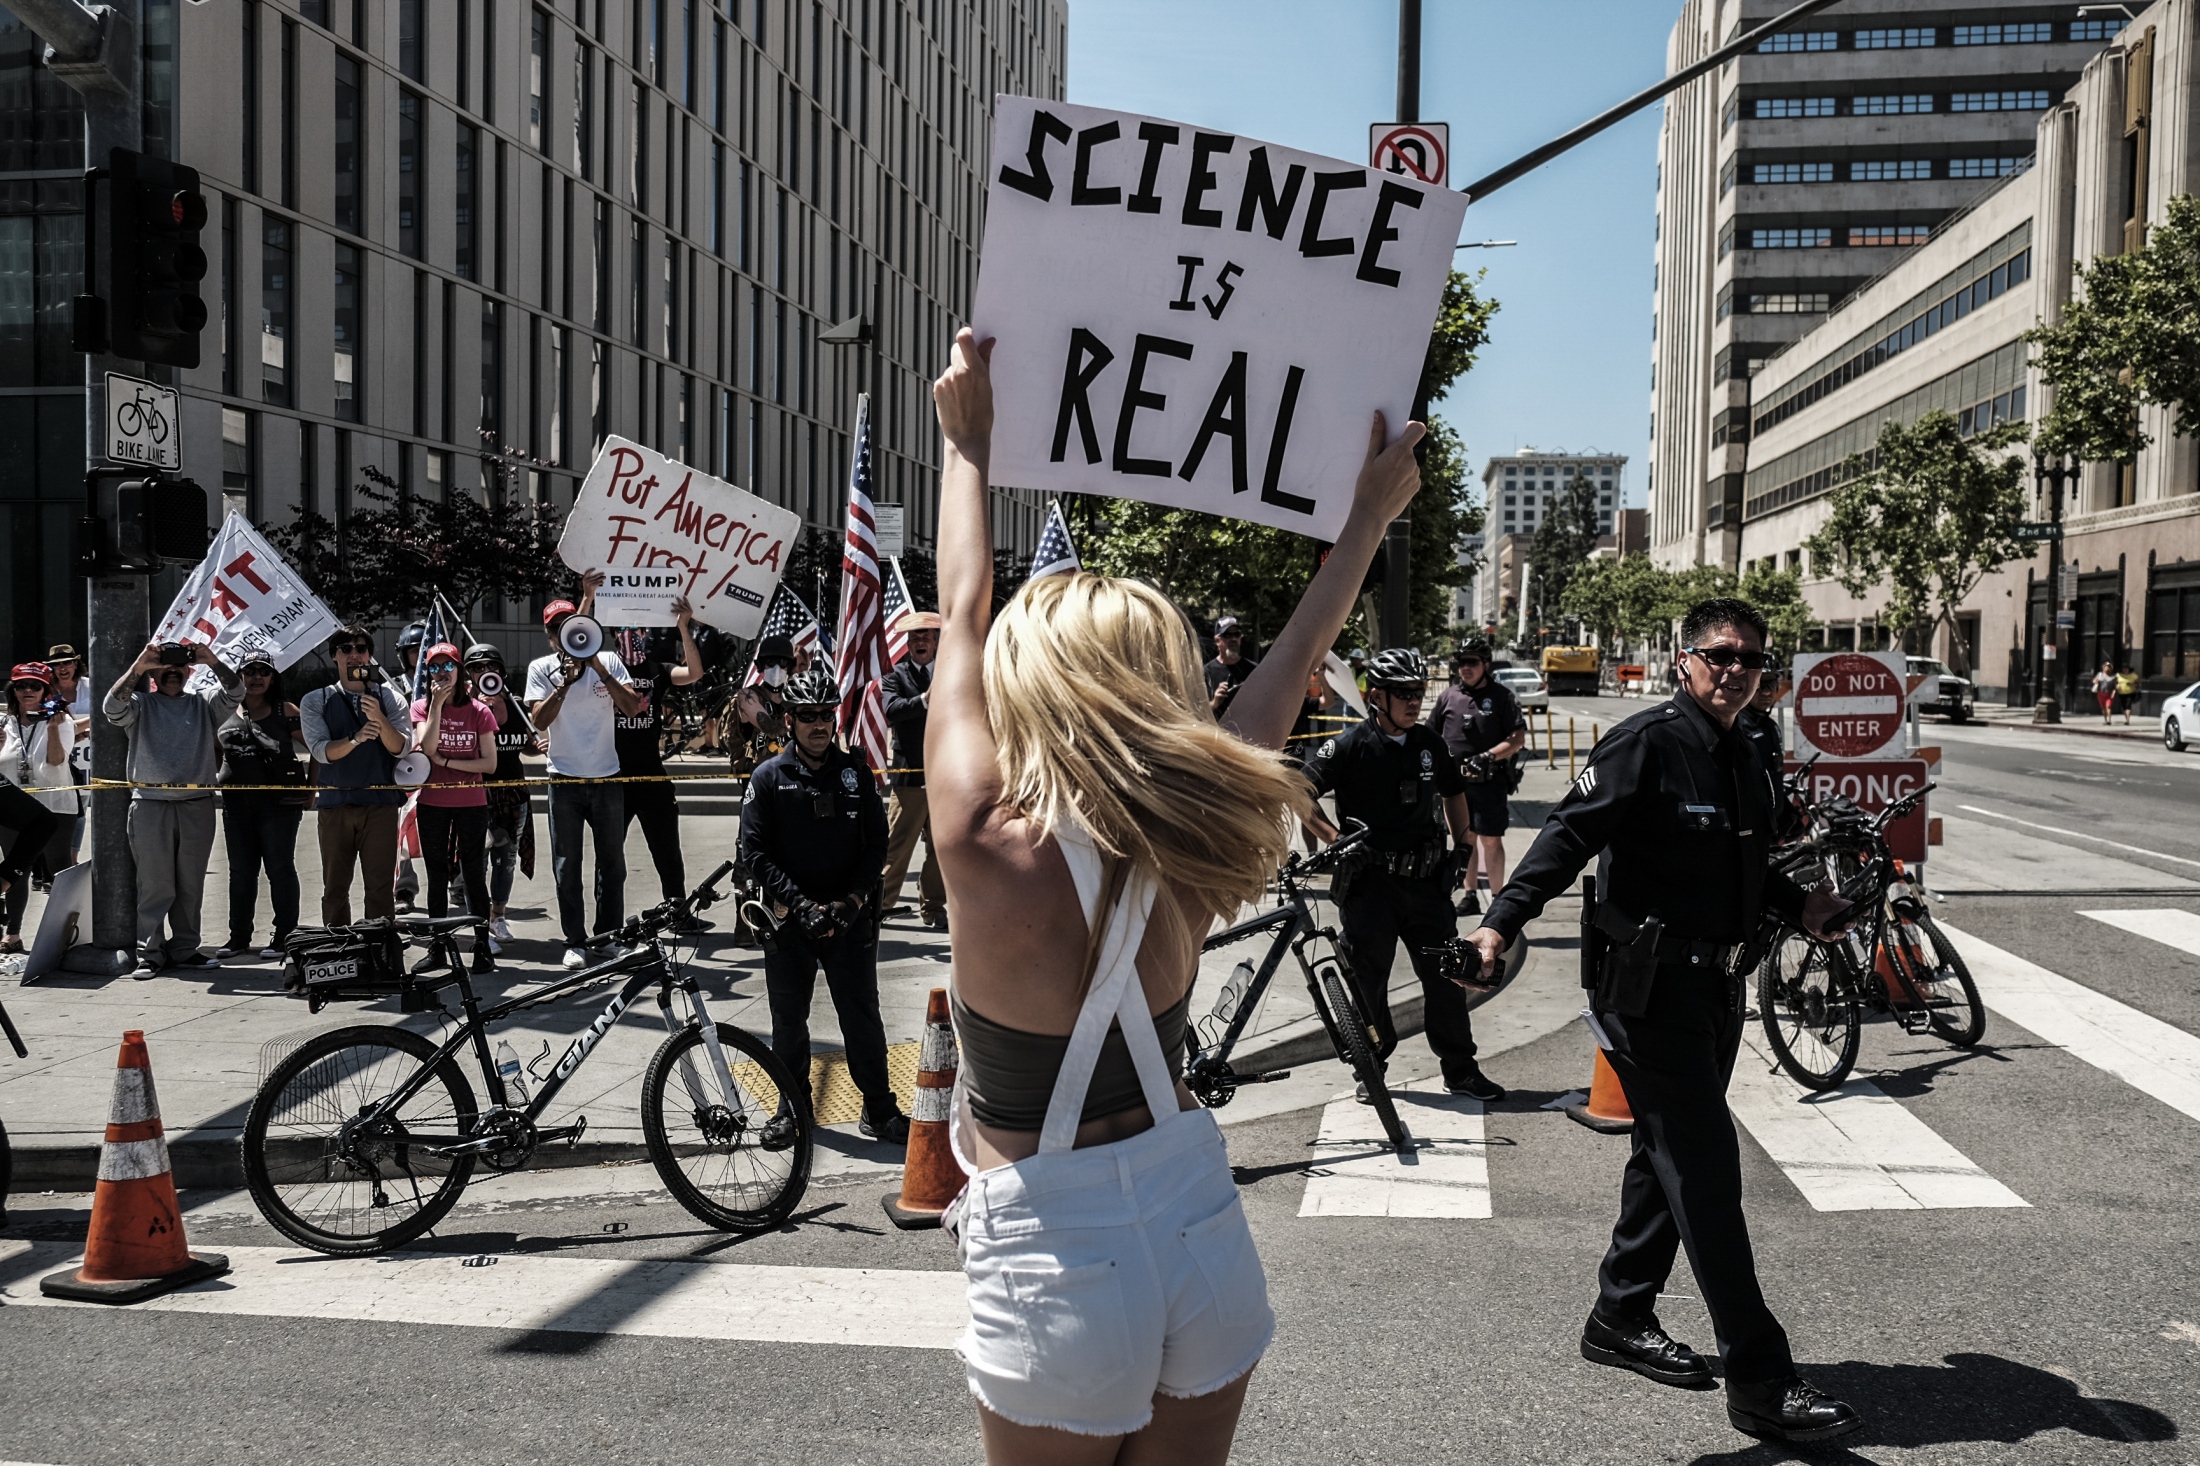 A woman is seen demonstrating in front of a small pro-Trump counter demonstration as scientists...